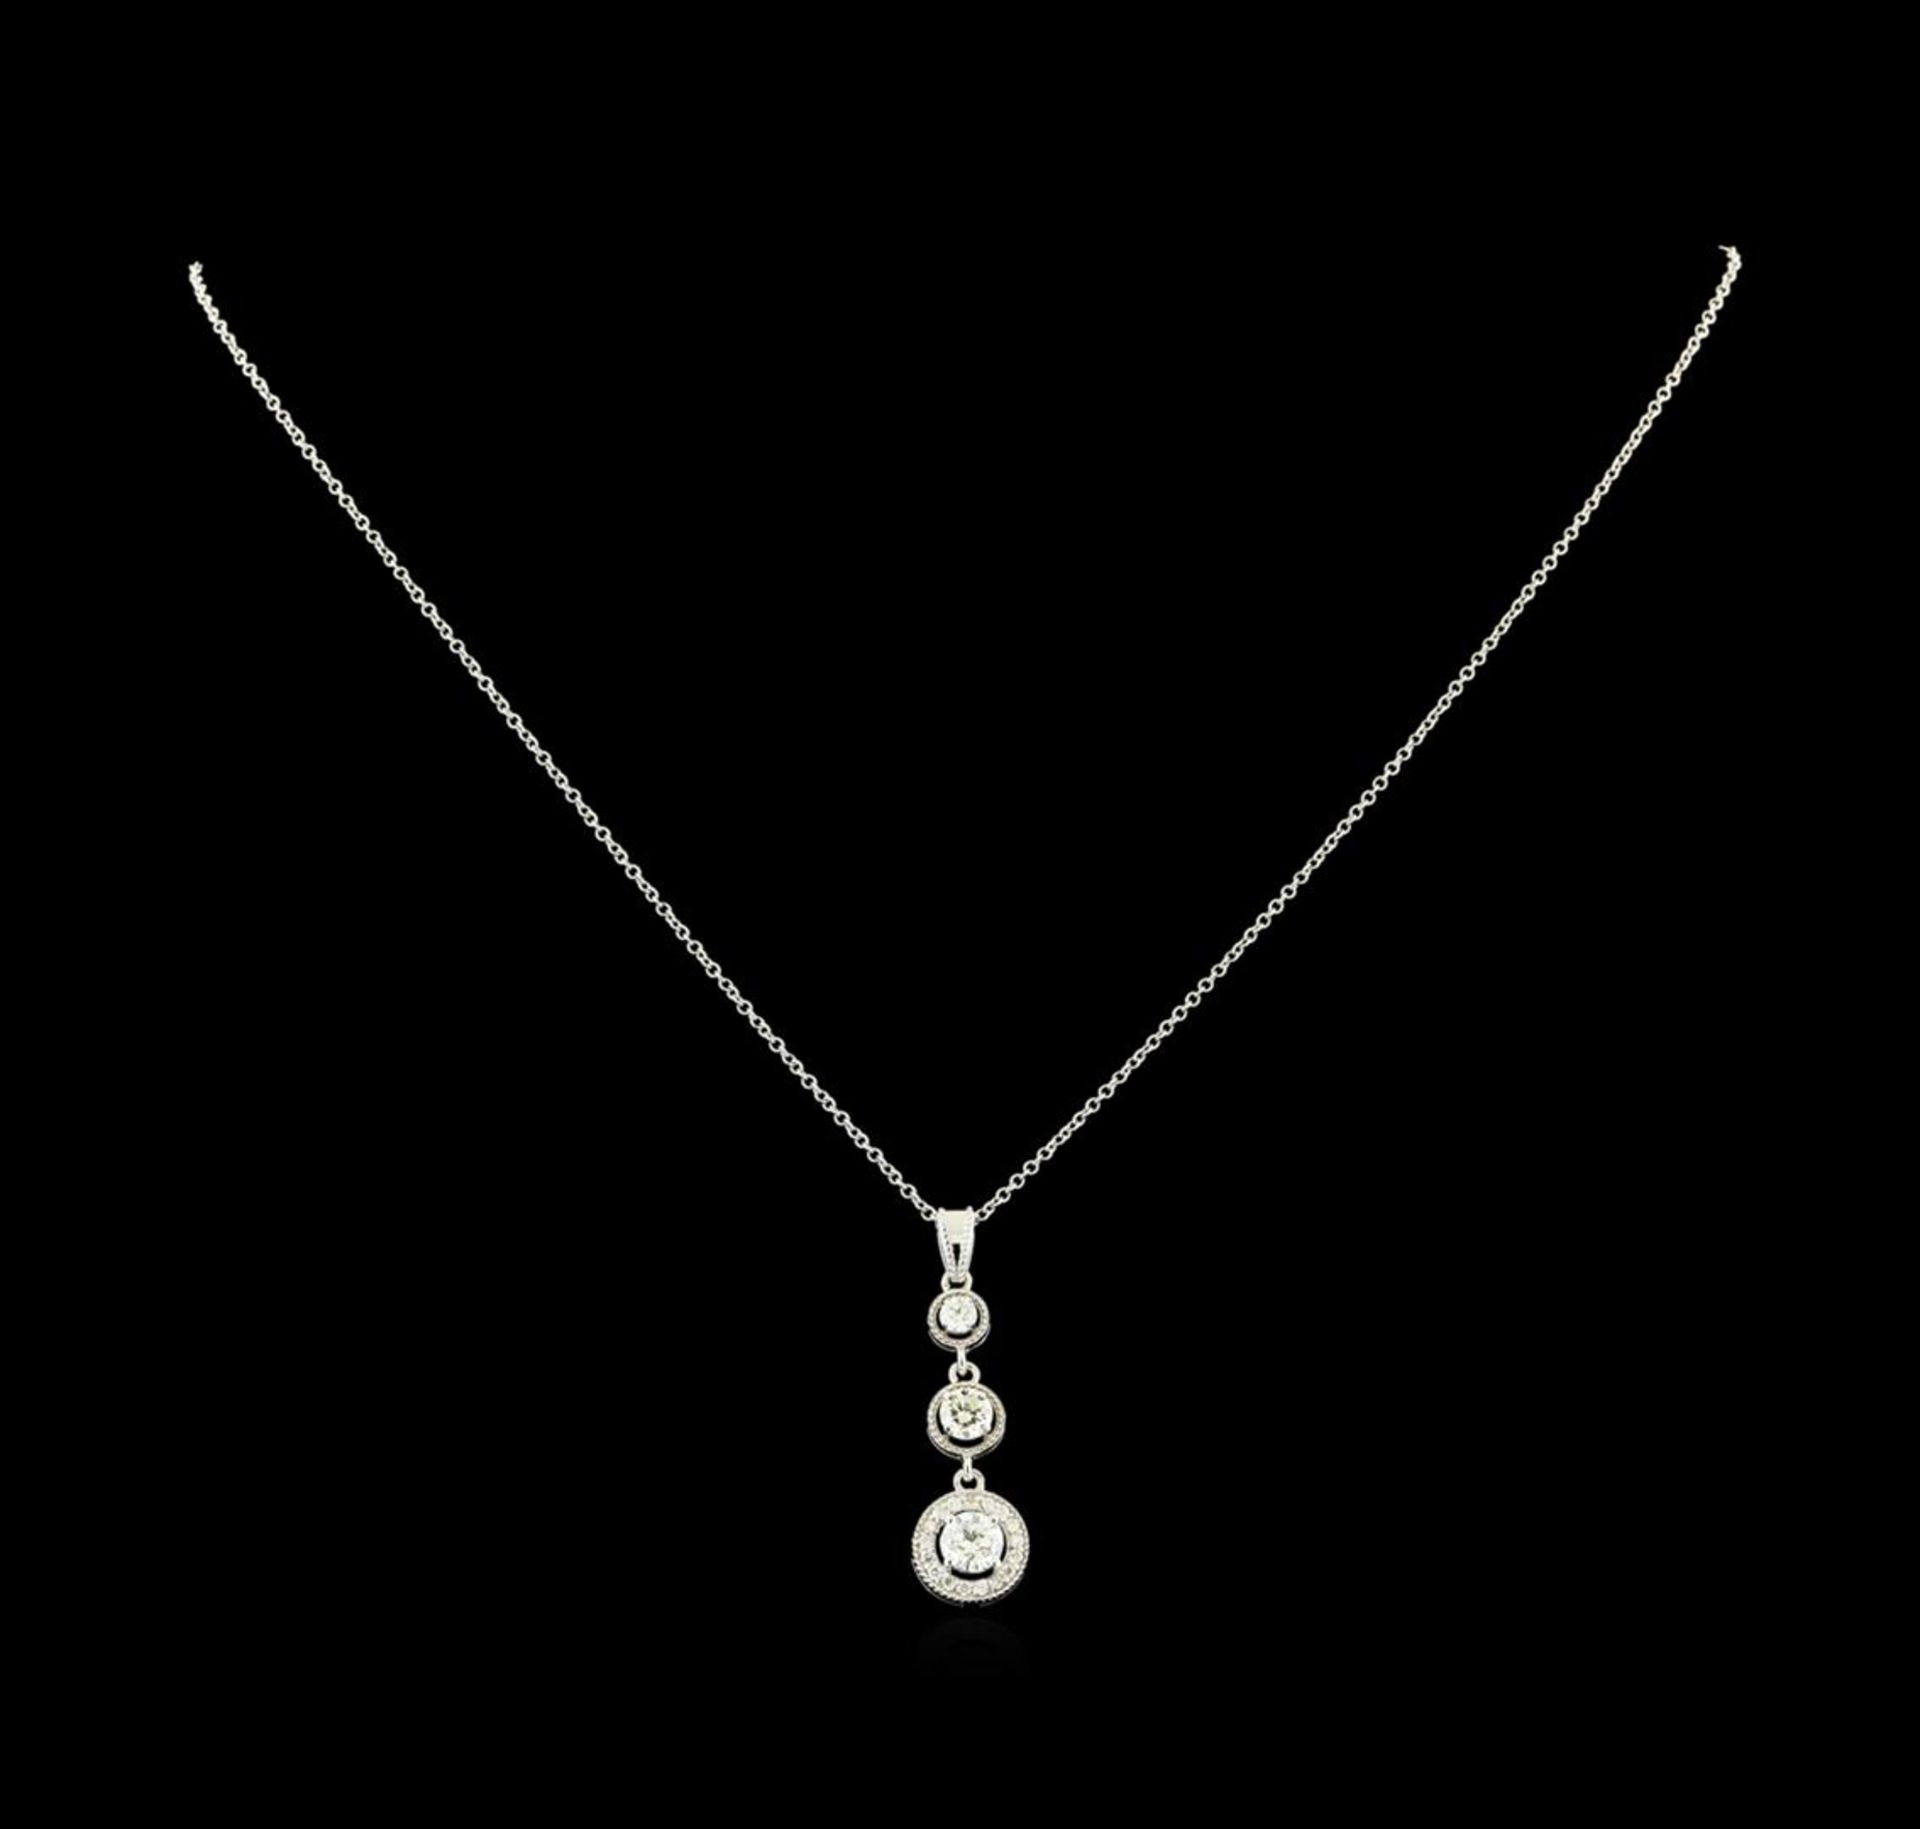 1.06 ctw Diamond Pendant With Chain - 14KT White Gold - Image 4 of 8